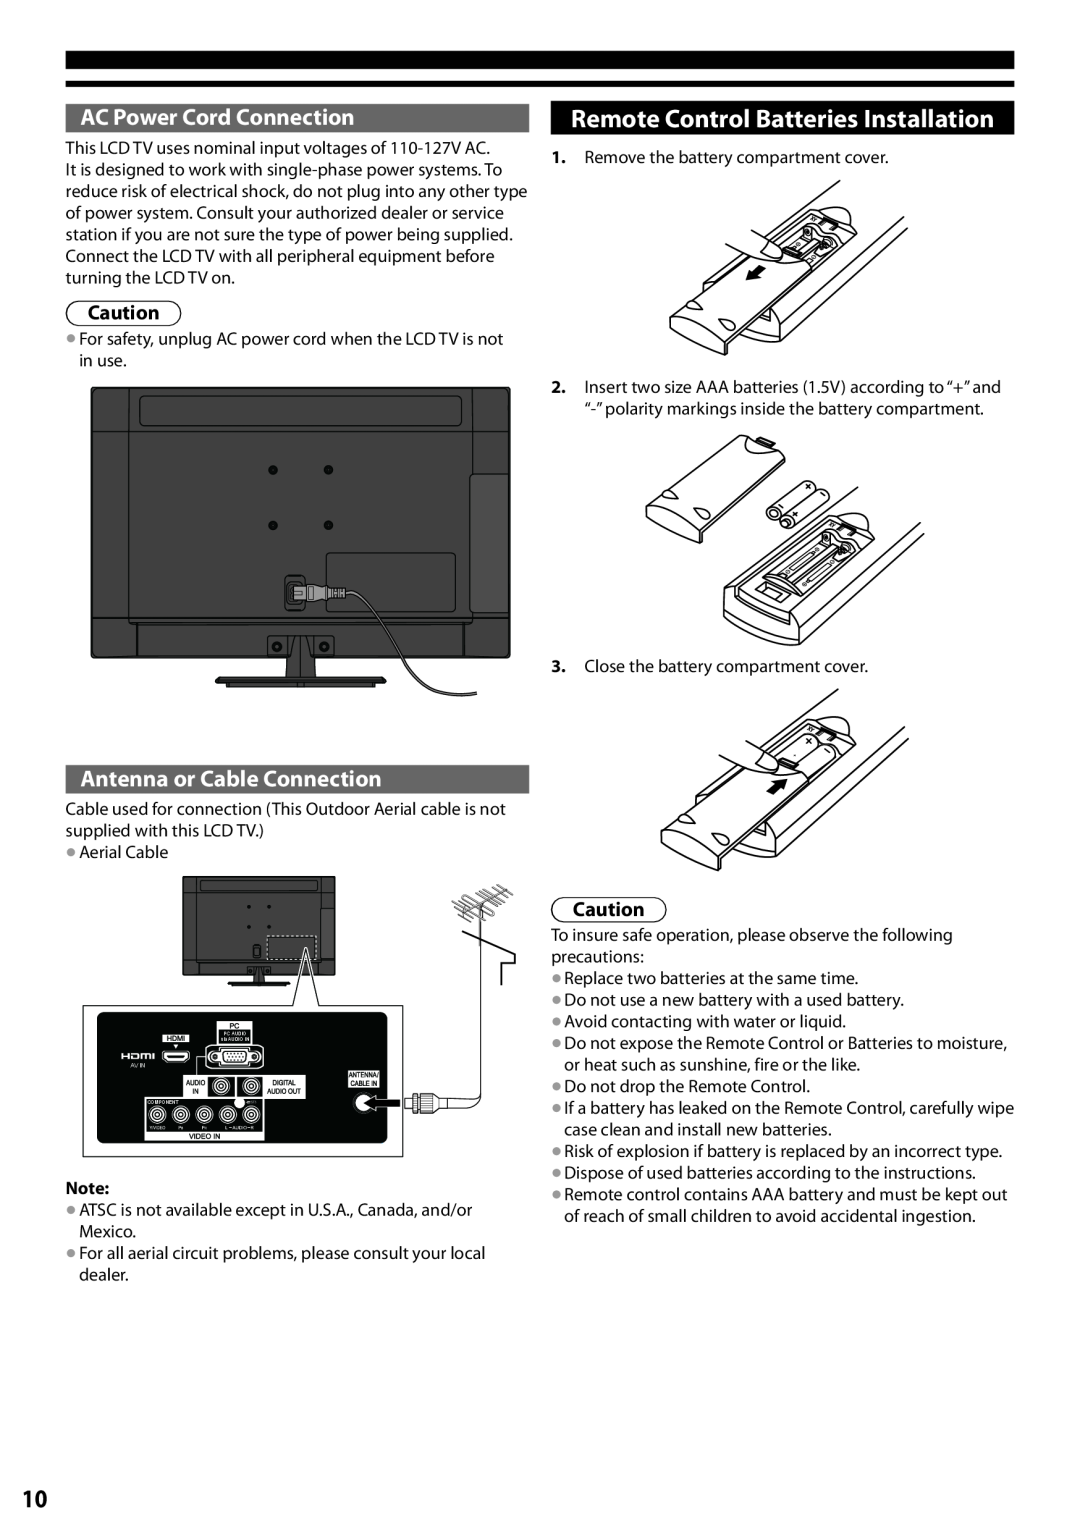 Panasonic TC-L24X5 Remote Control Batteries Installation, AC Power Cord Connection, Antenna or Cable Connection 